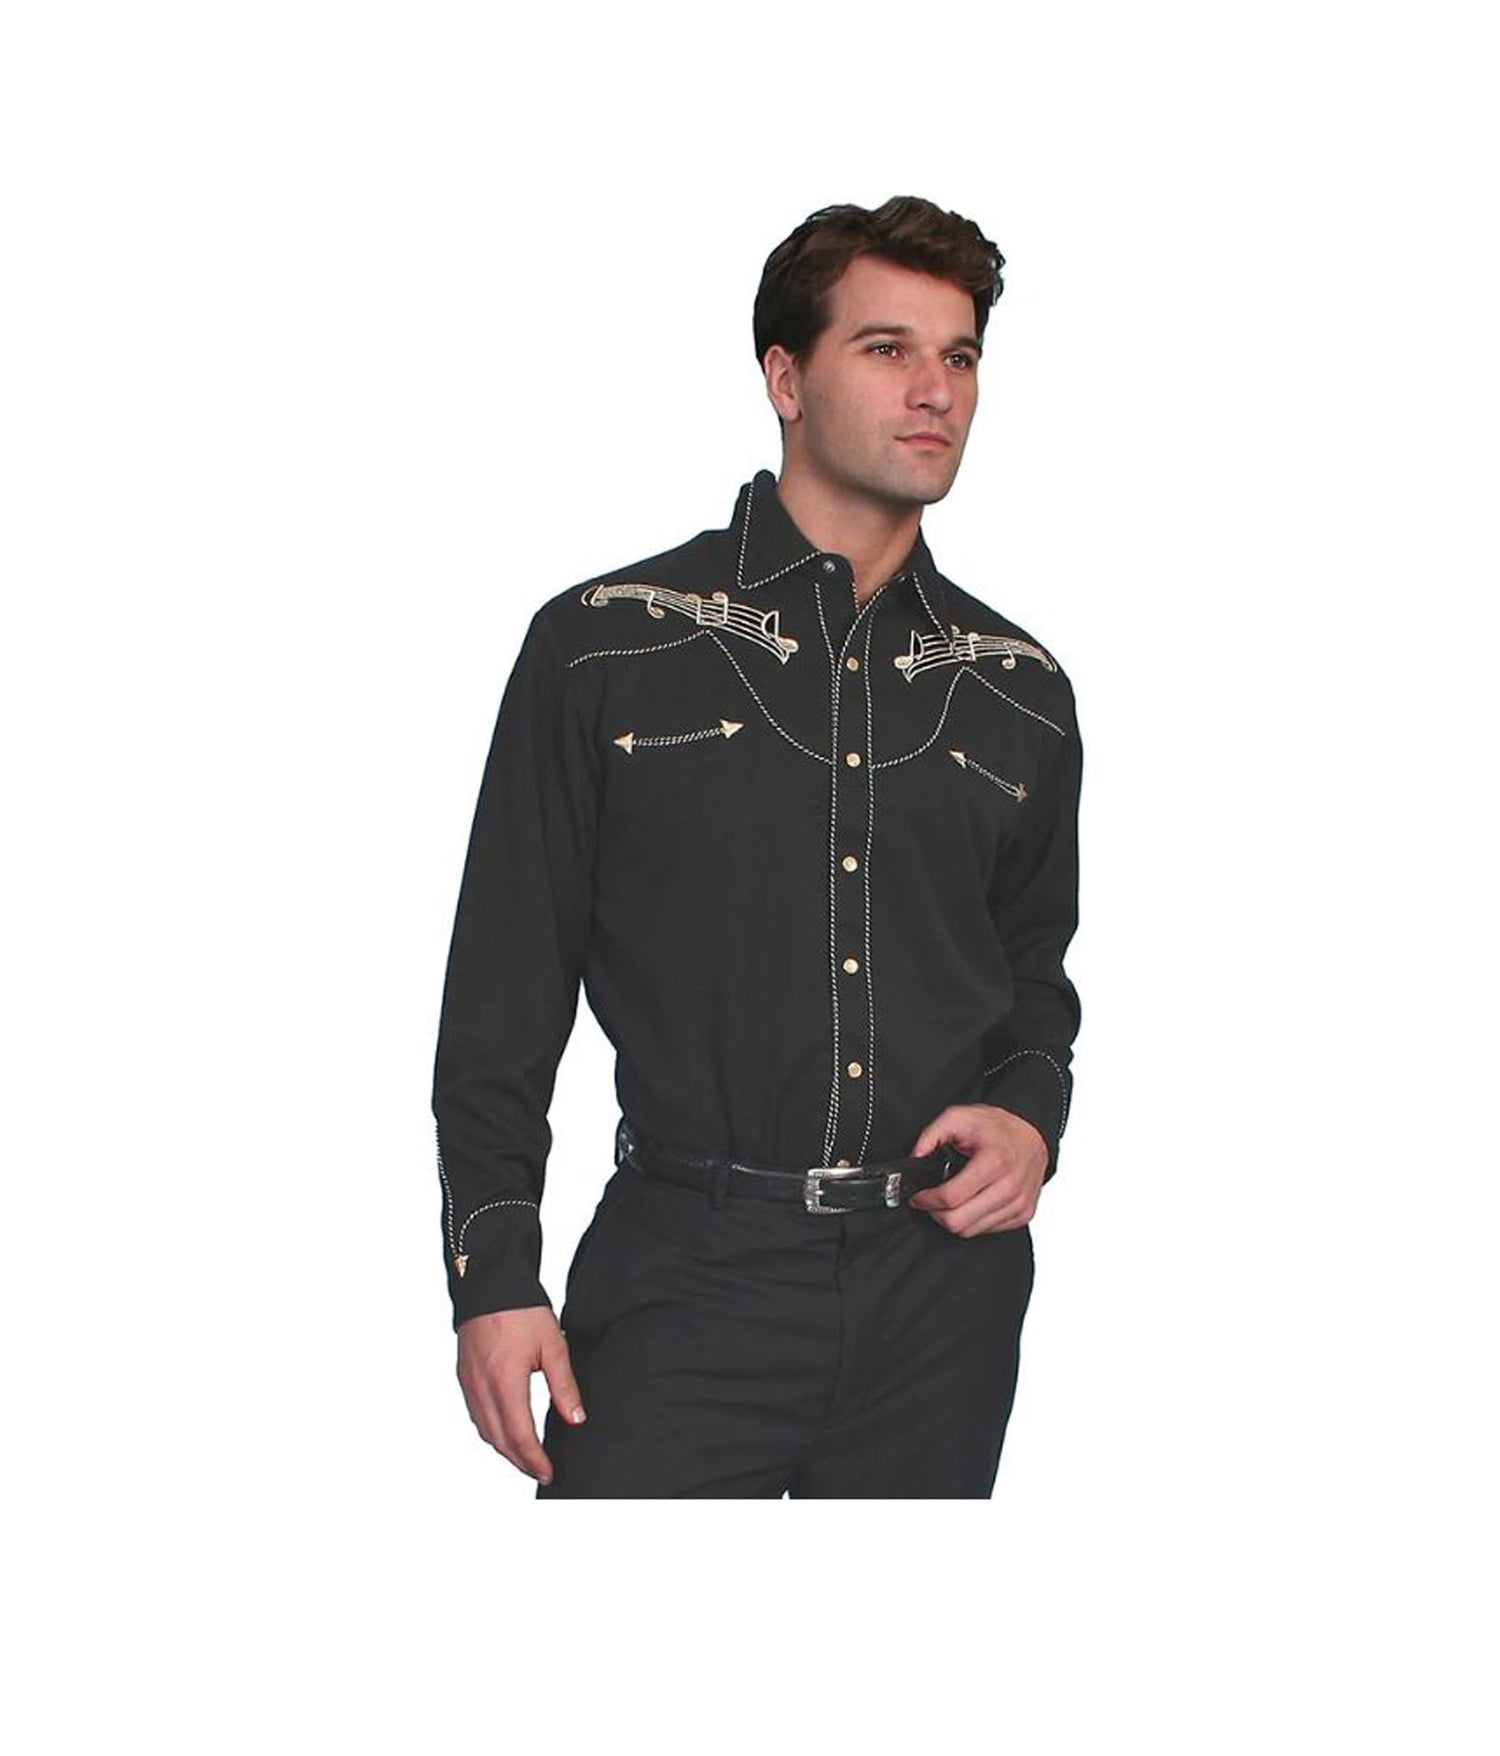 Men's Musical Embroidery Western Snap Shirt